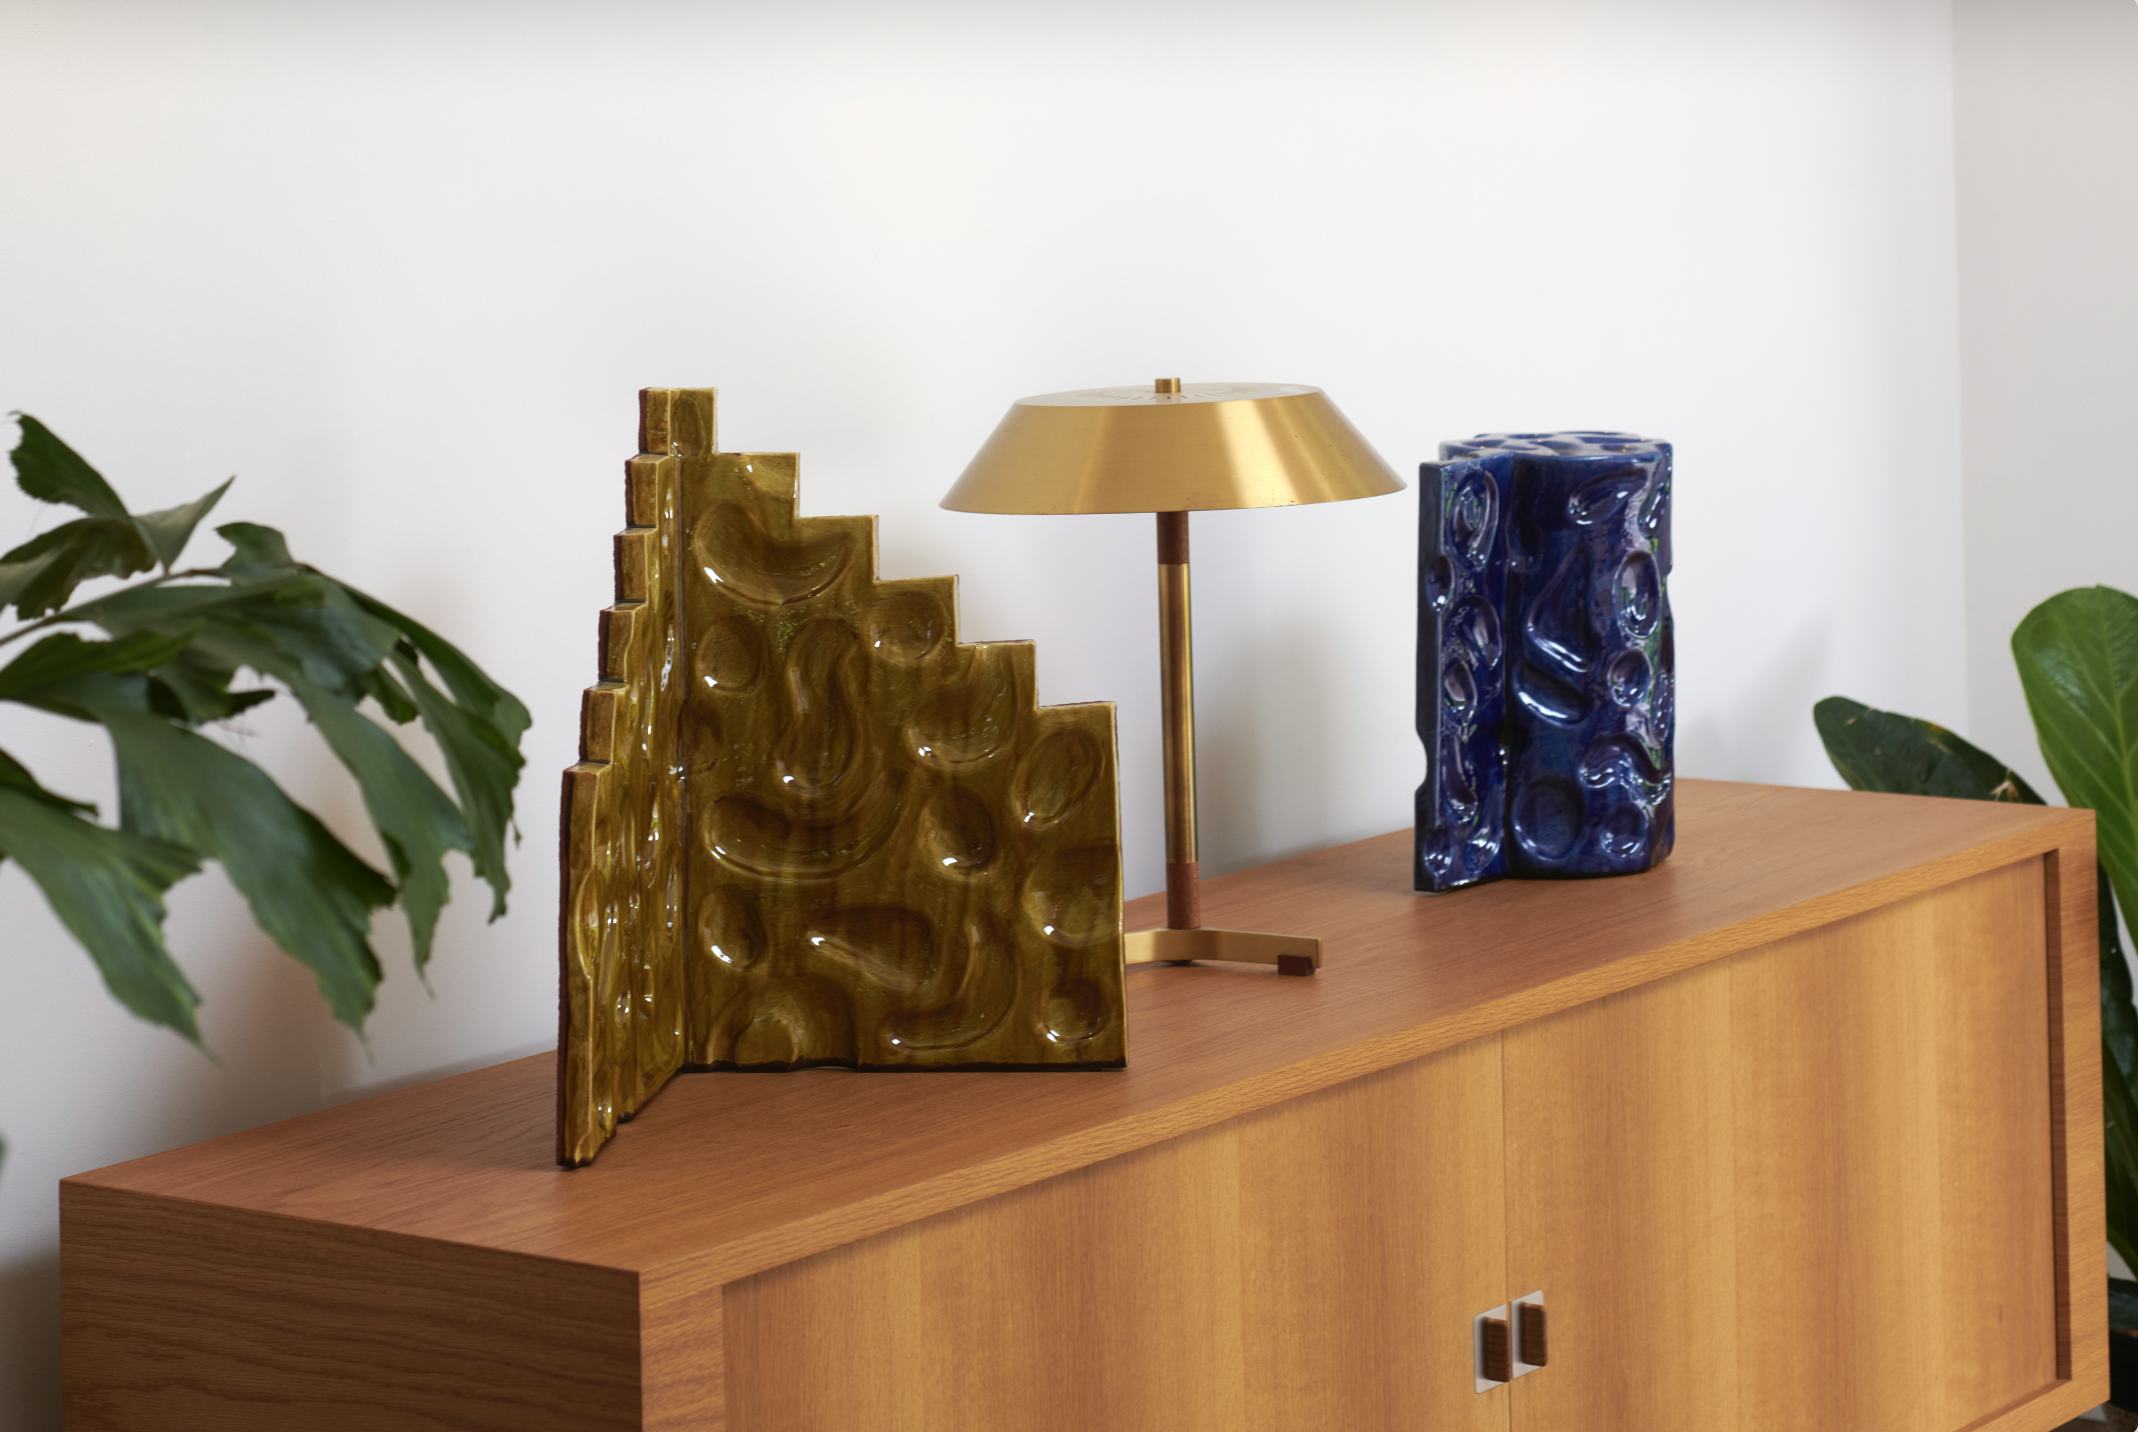 Two artworks sit on top of a cabinet